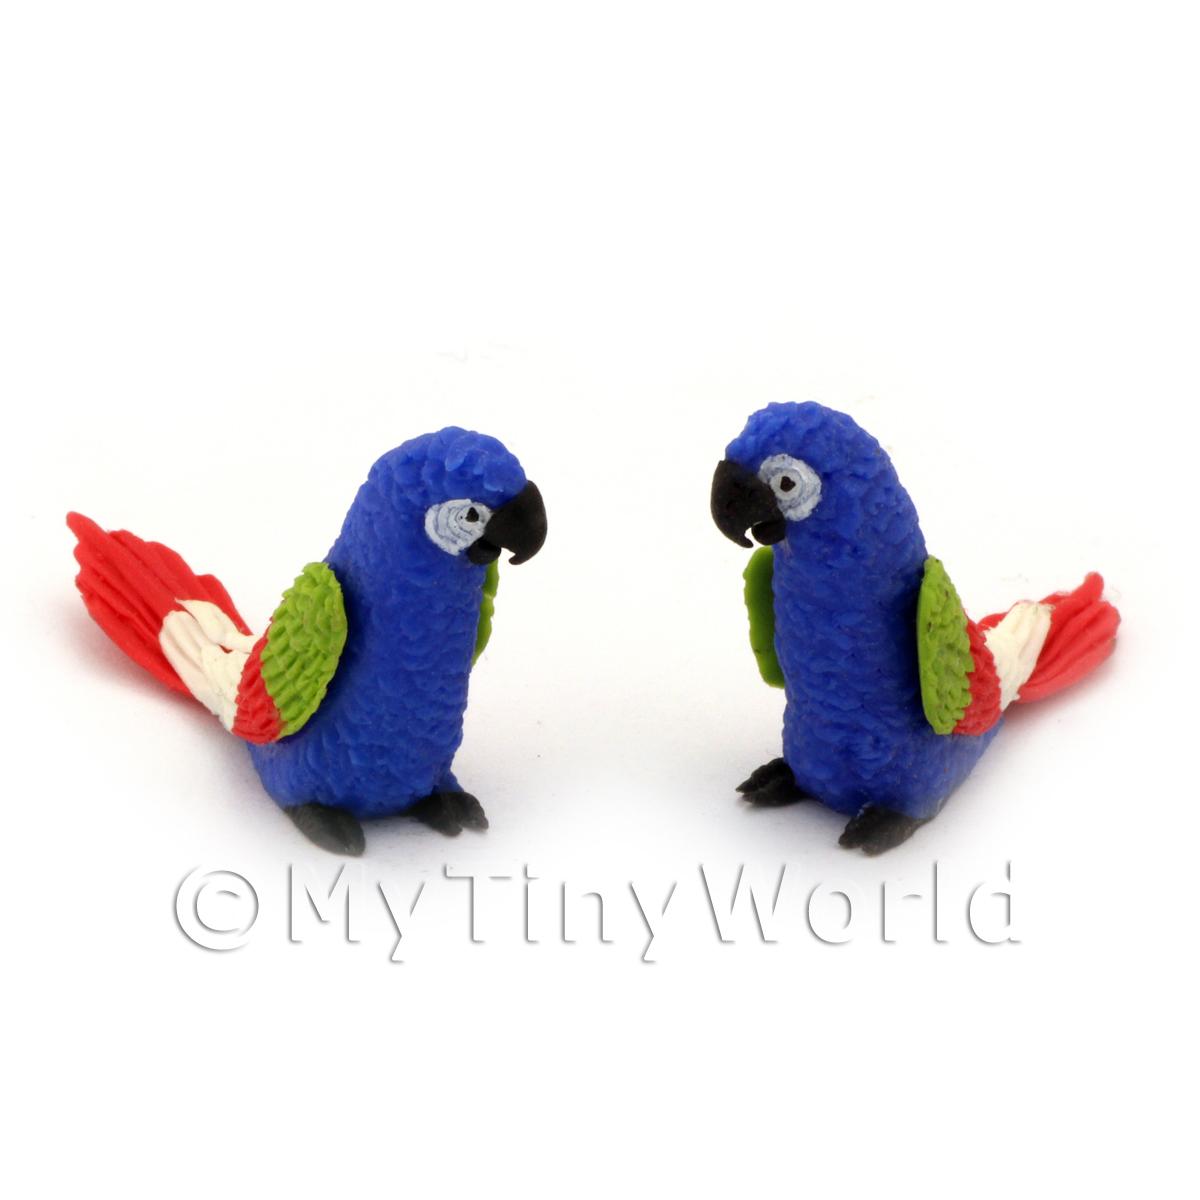 2 Blue Dolls House Miniature Parrots With Multi-colured Wings And Red Tails 